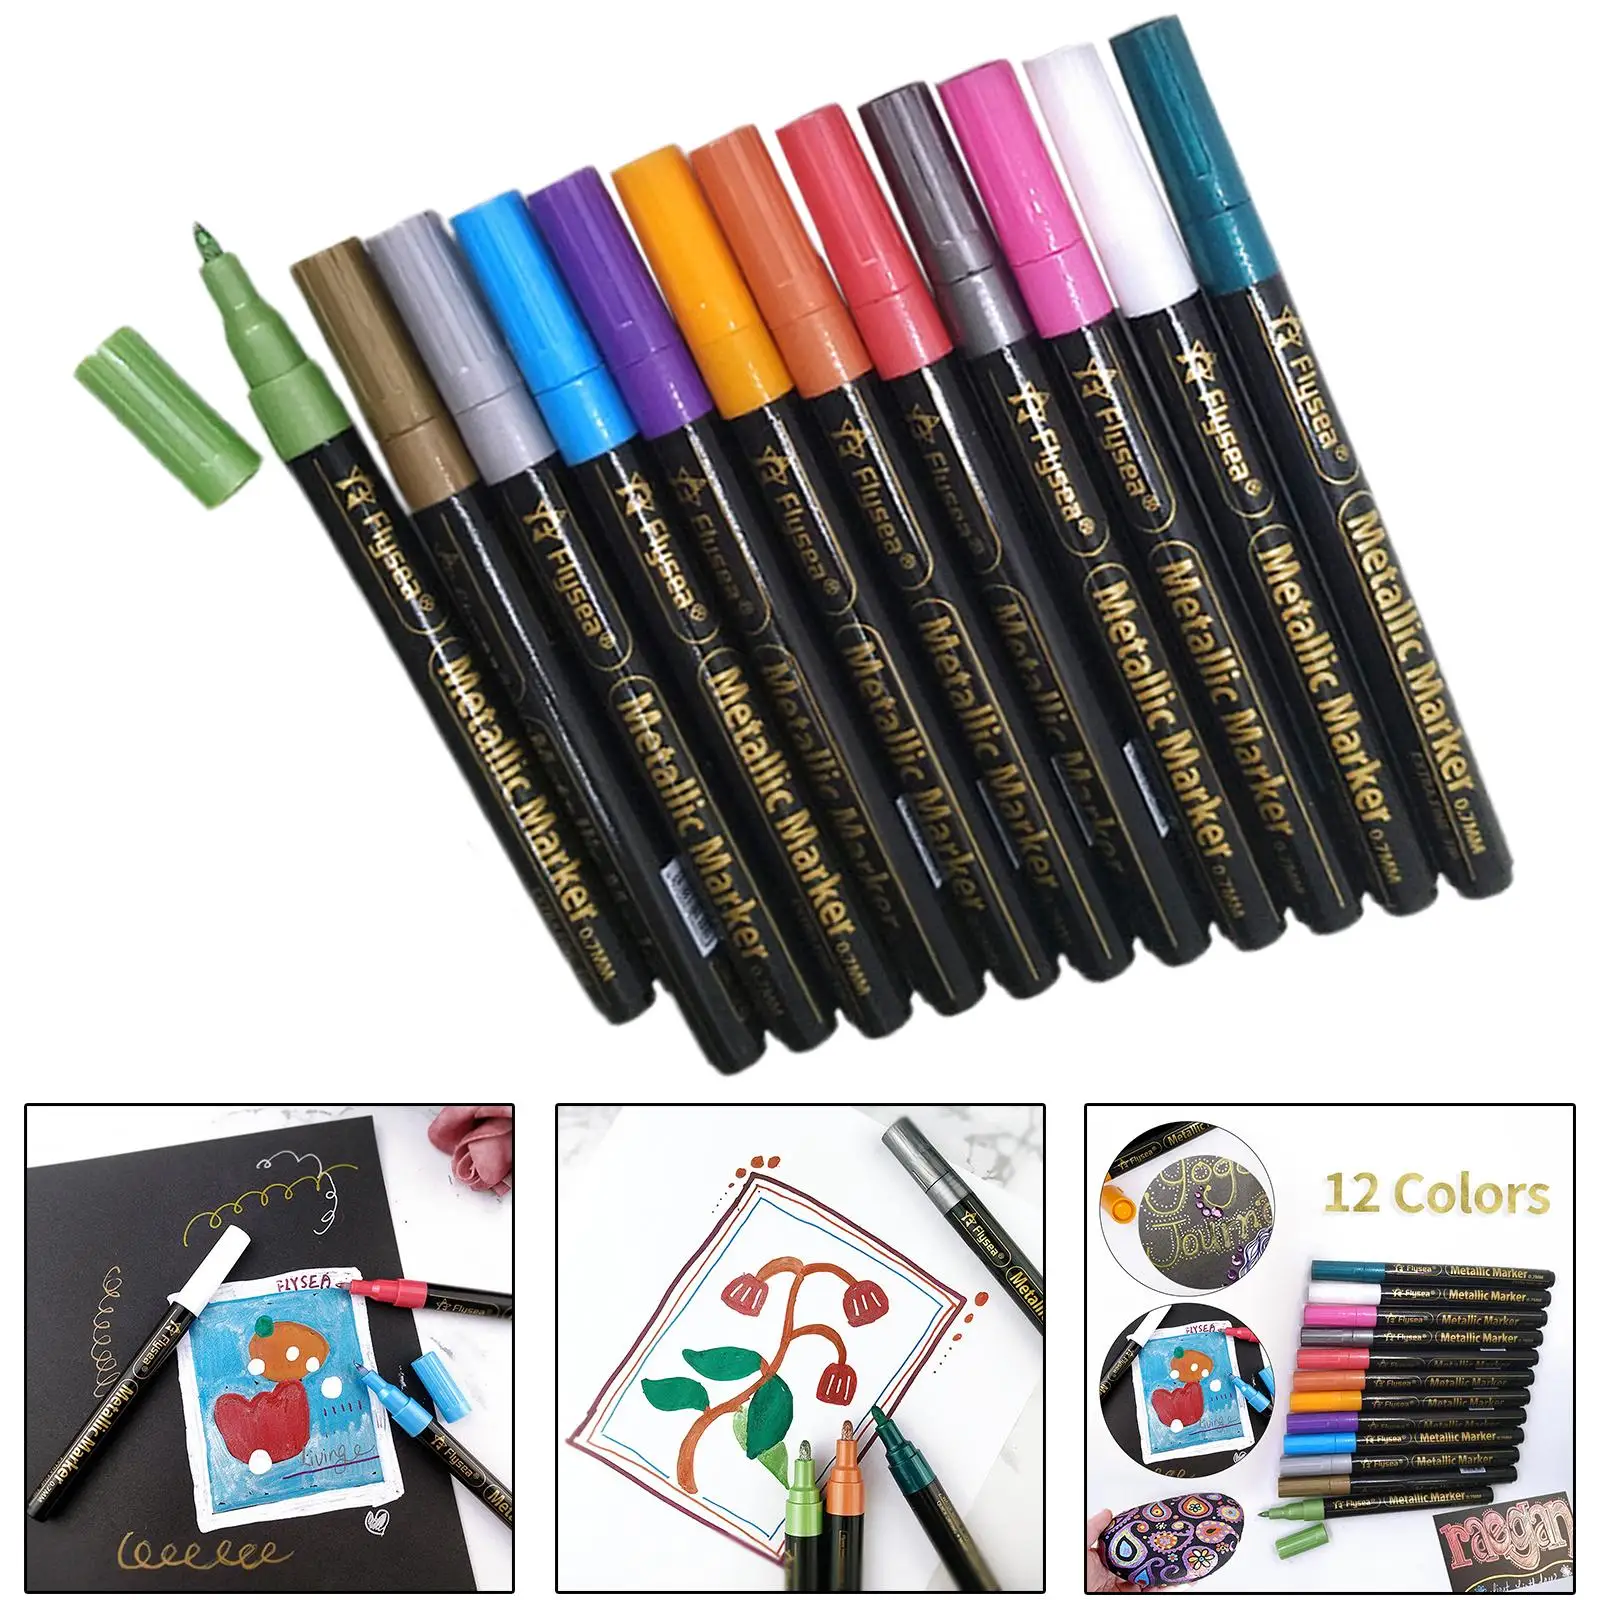 12 Colors Marker Pens Water Based Marker Pens Crafts Quick Drying  Painting Wood Photo Album Card Making Ceramic